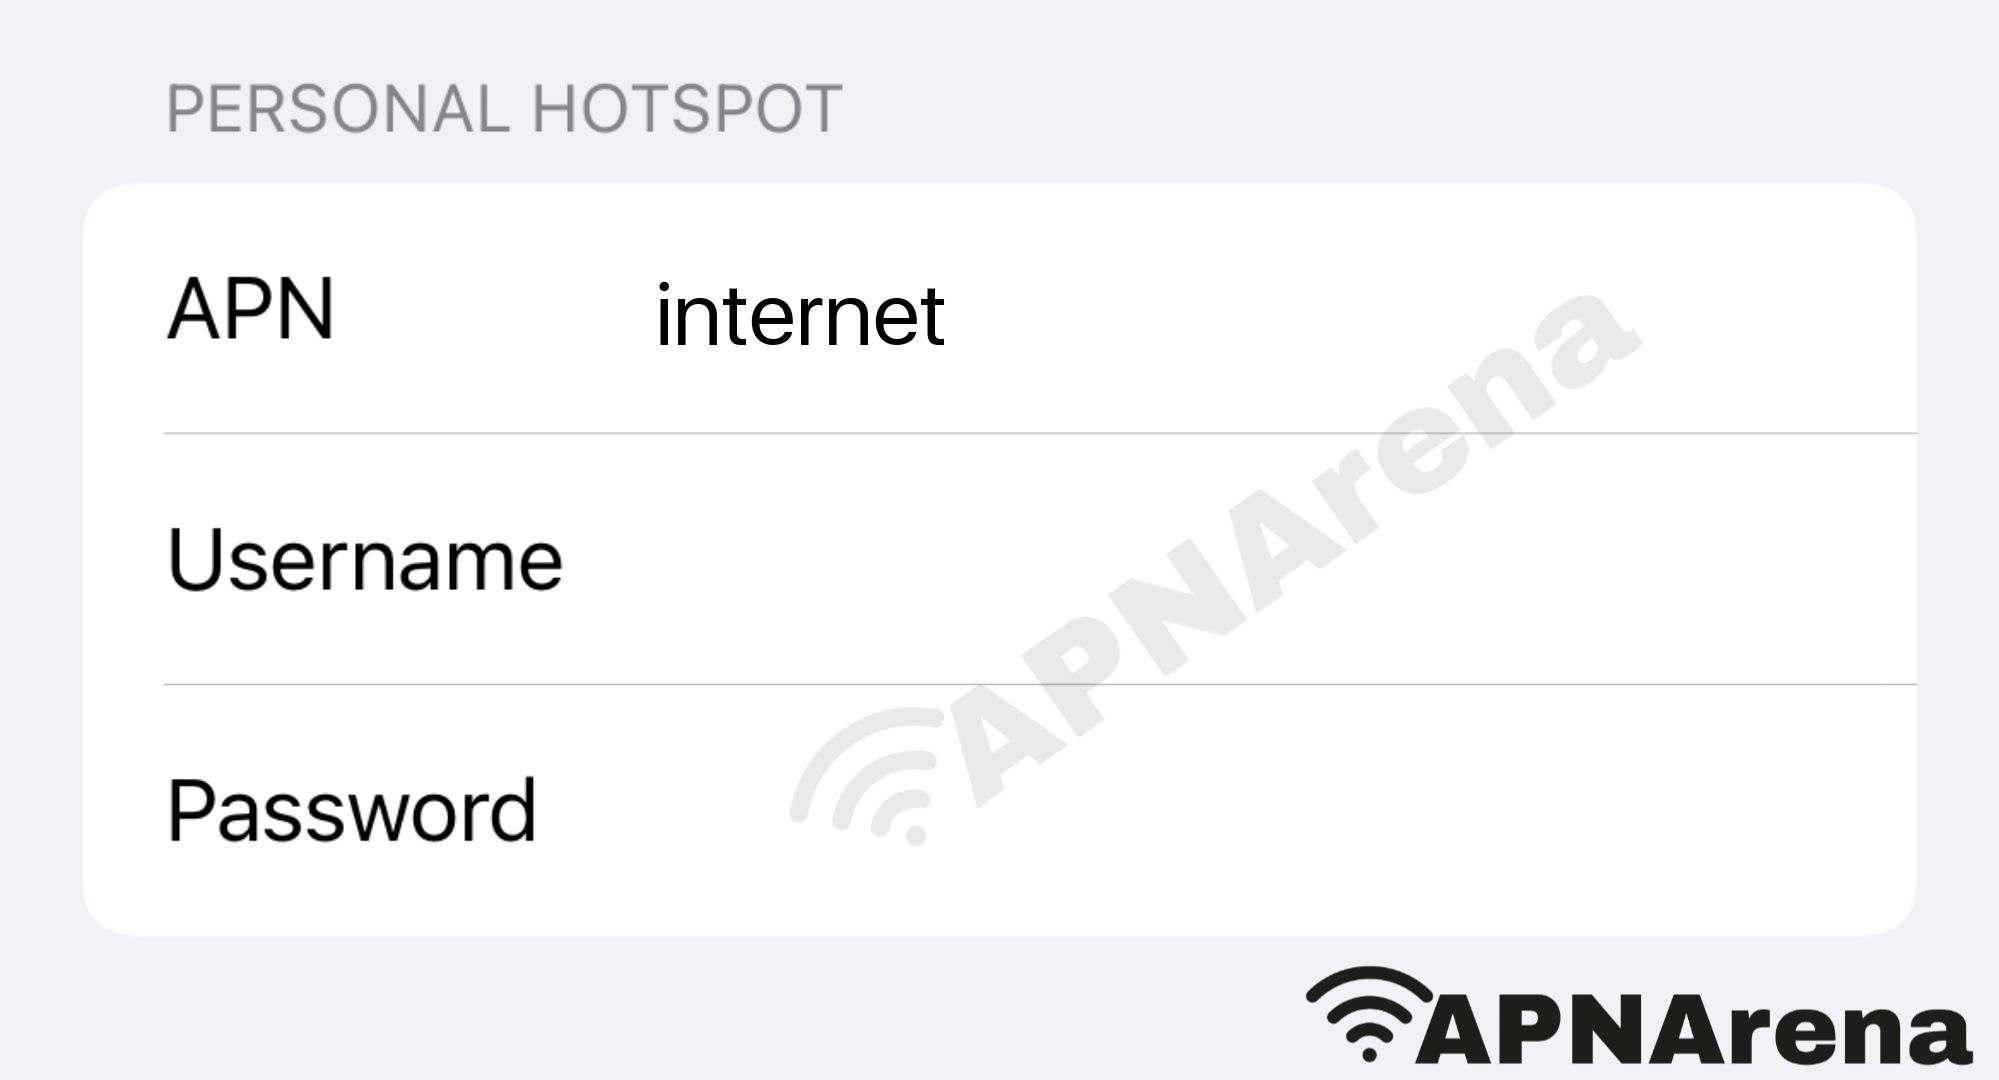 BSNL Personal Hotspot Settings for iPhone